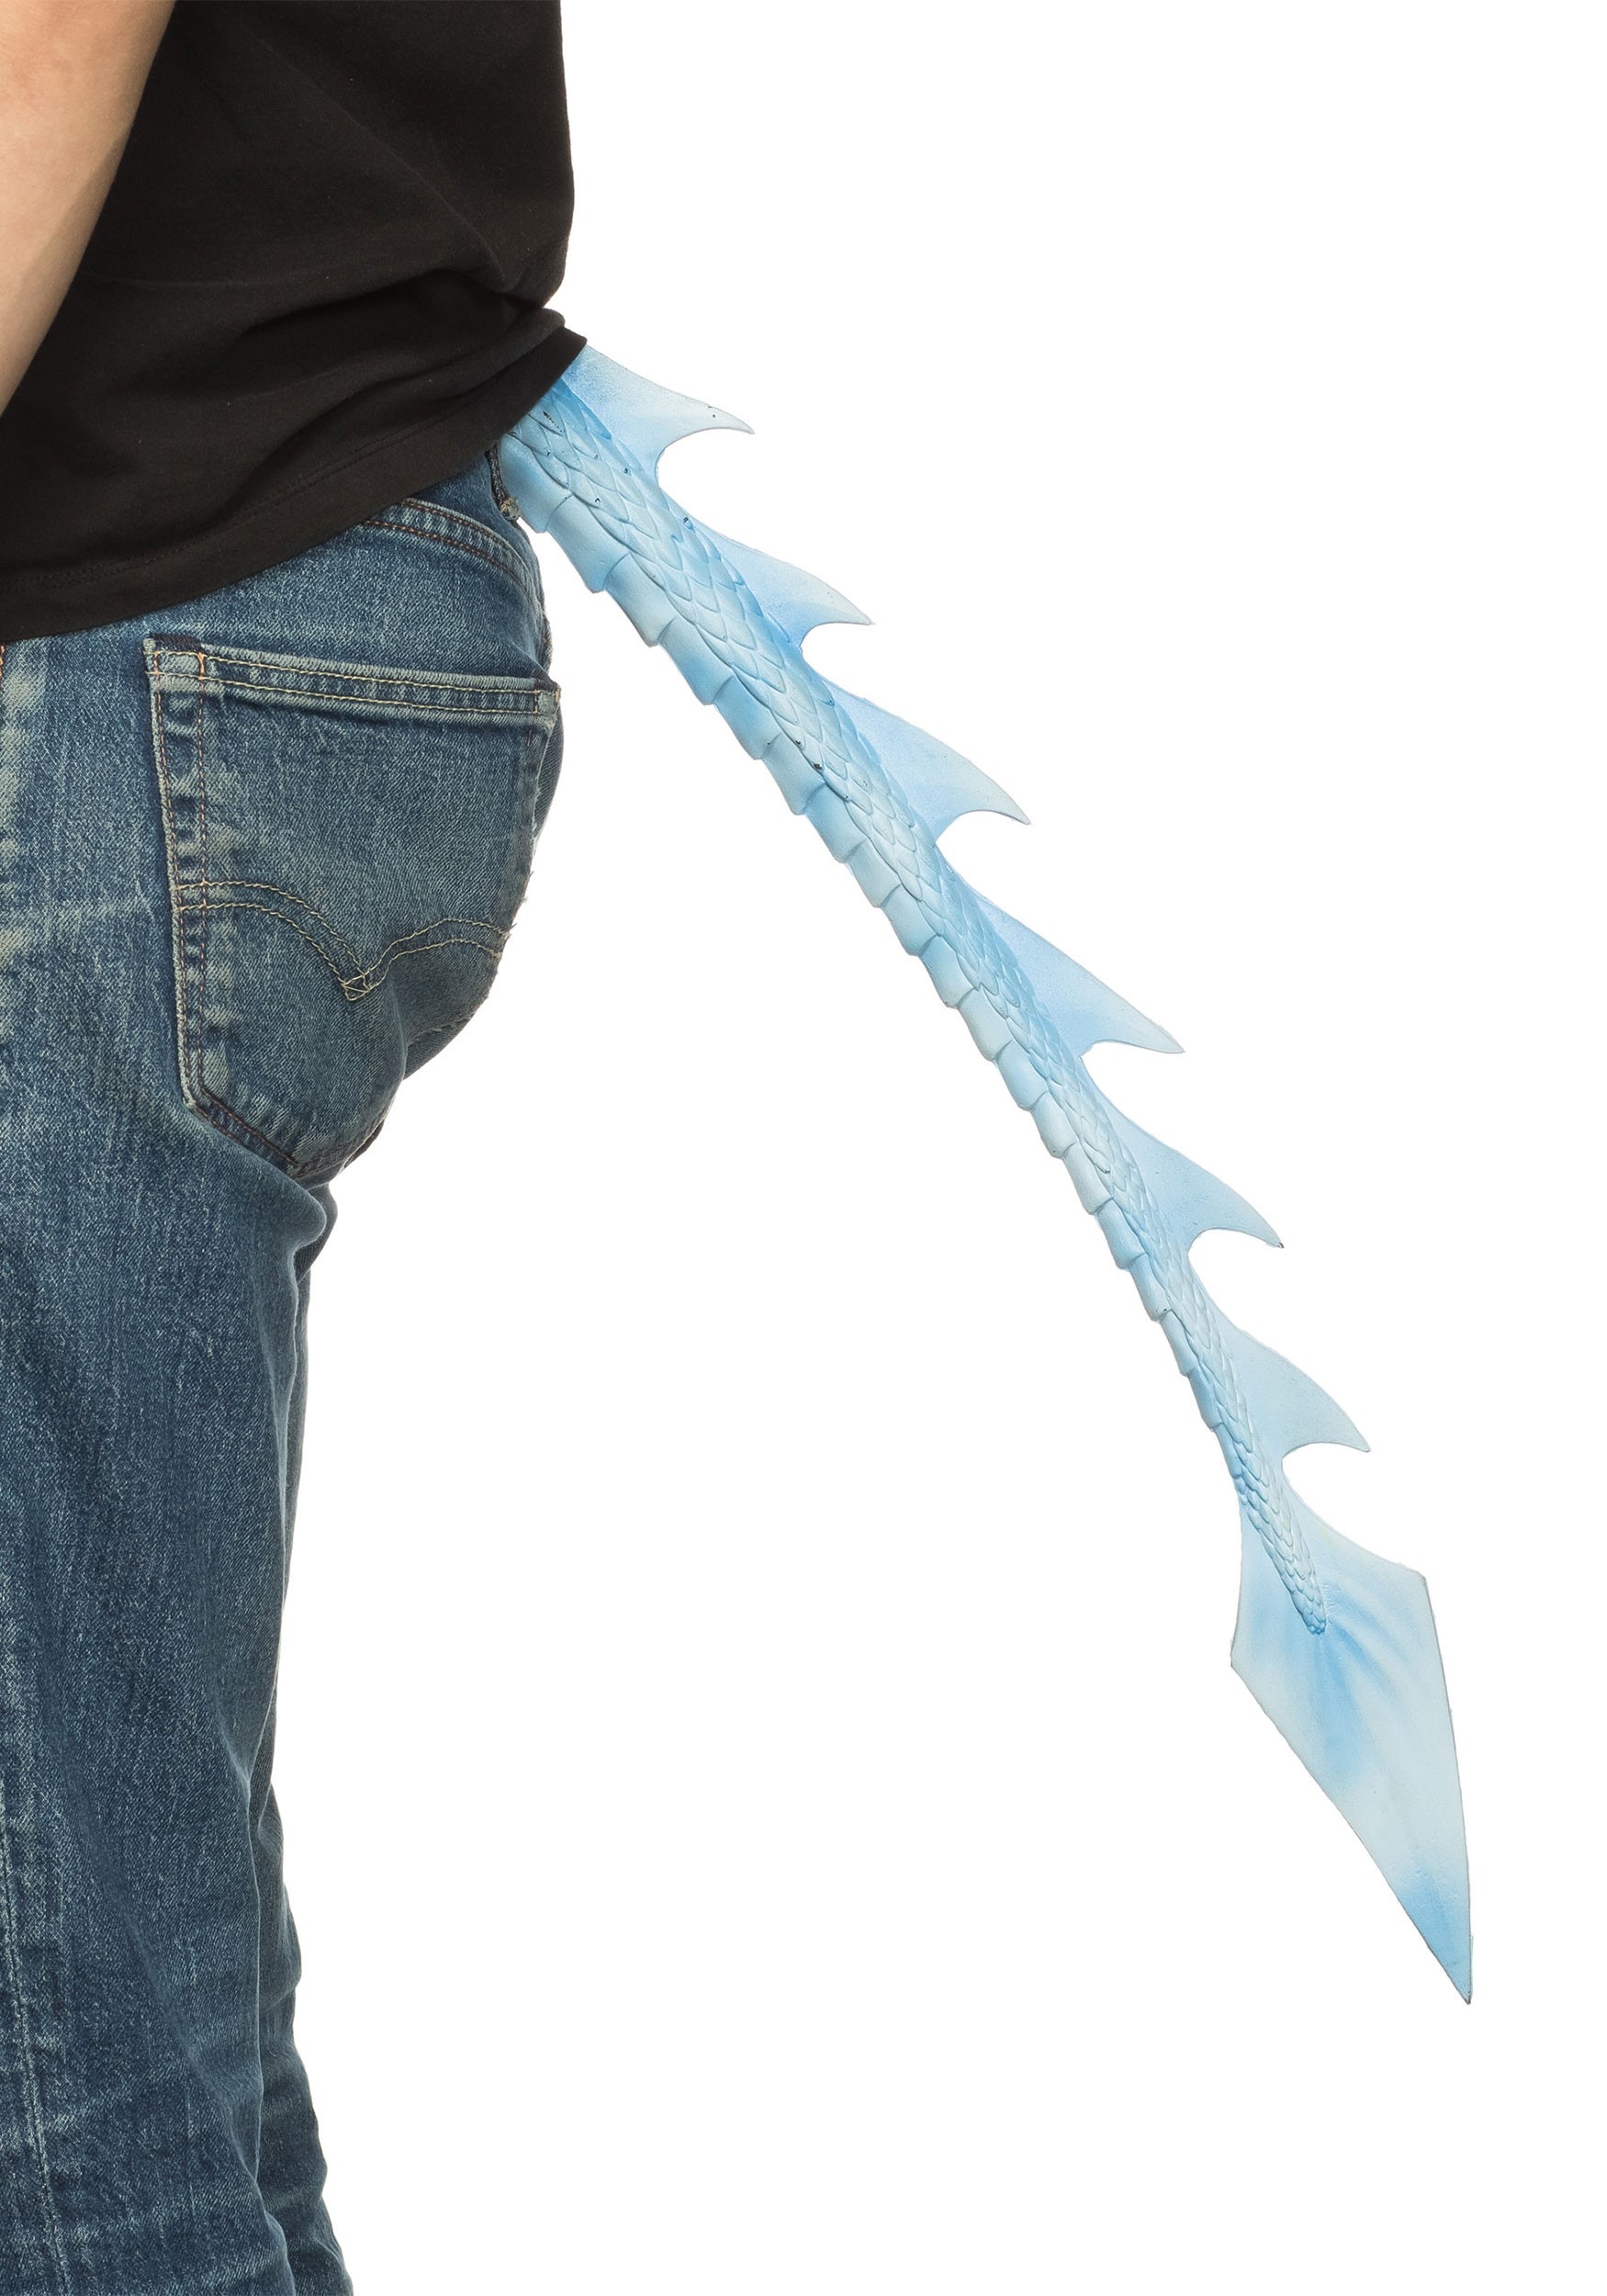 Ice Blue Dragon Tail Accessory